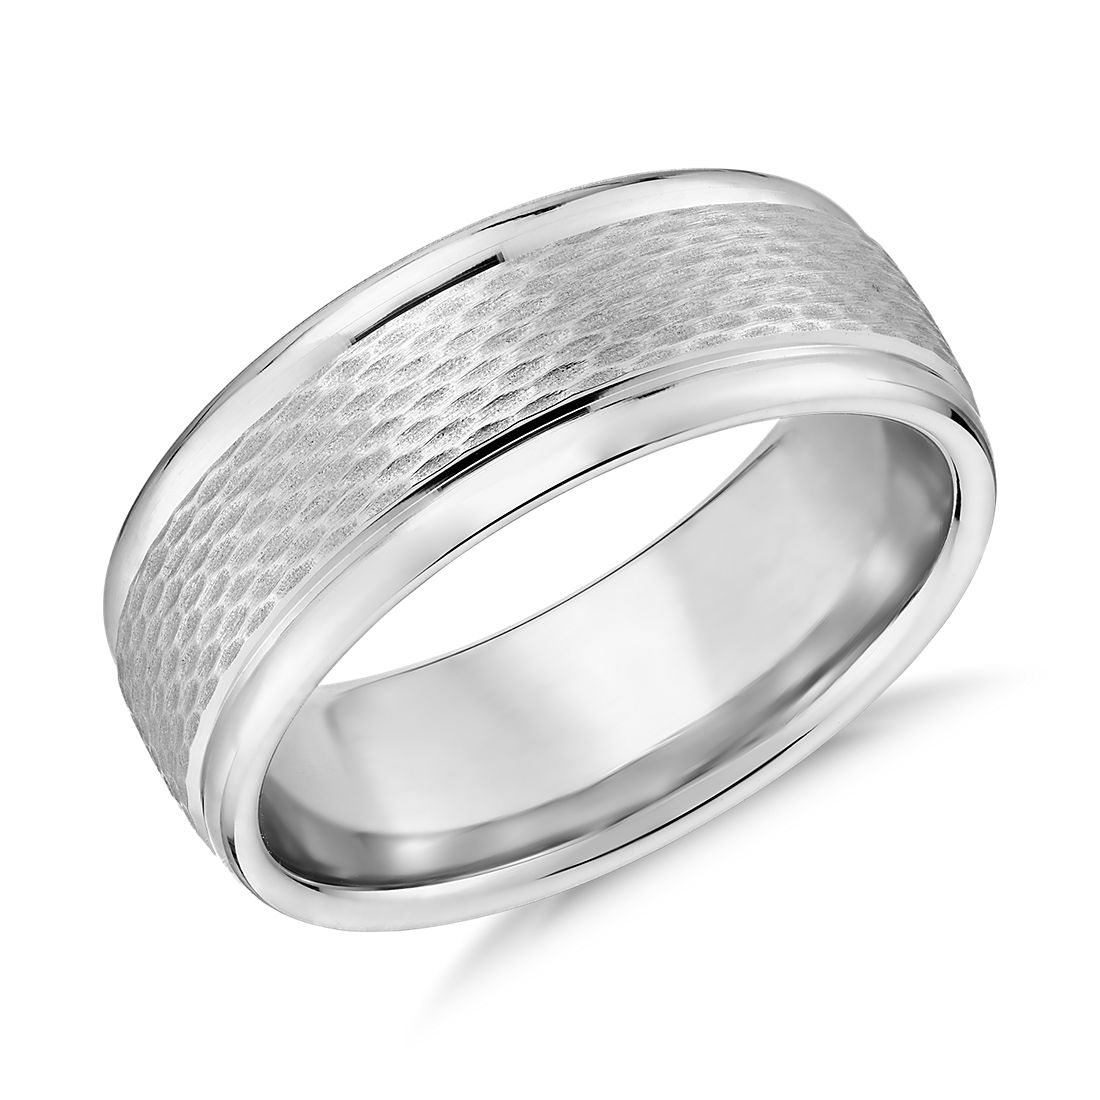 Textured Inlay Wedding Ring in 14k White Gold (7.5mm) | Blue Nile